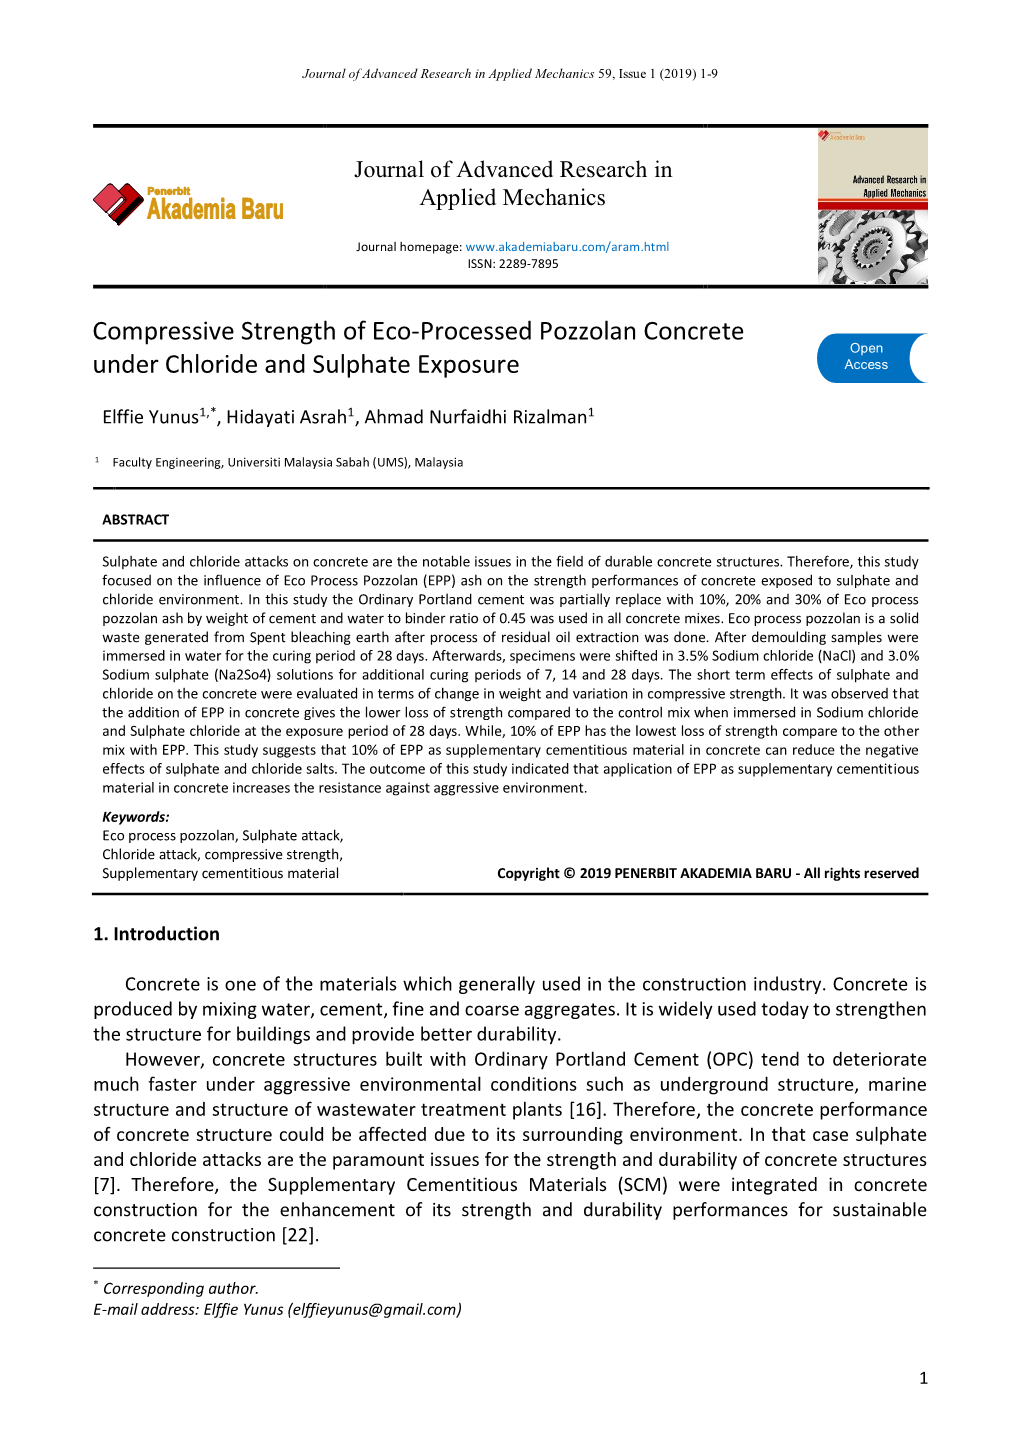 Compressive Strength of Eco-Processed Pozzolan Concrete Open Access Under Chloride and Sulphate Exposure